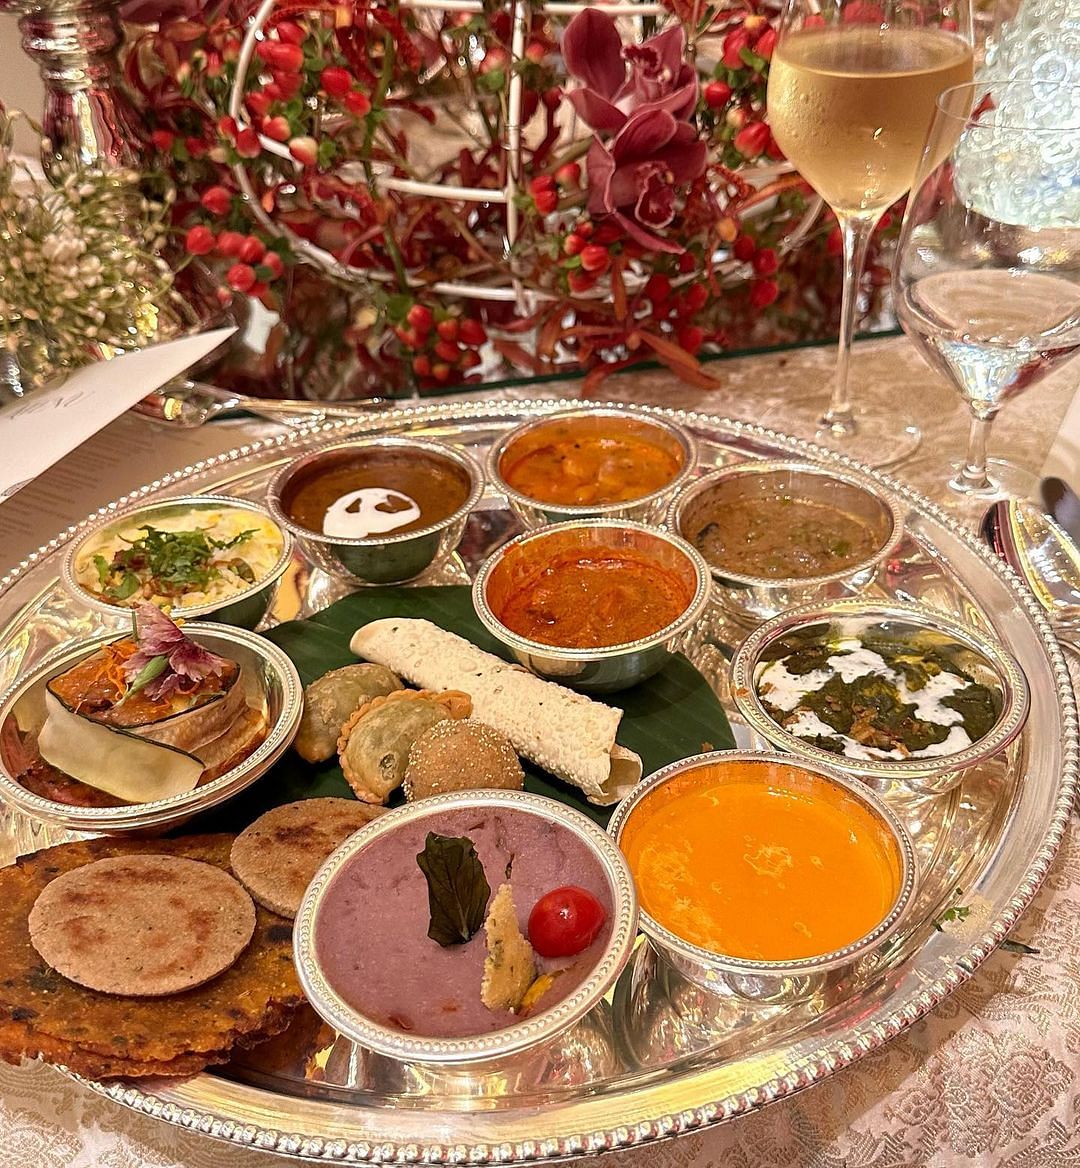 The food was served in a silver thali at the inauguration of the Nita Mukesh Ambani Cultural Centre.